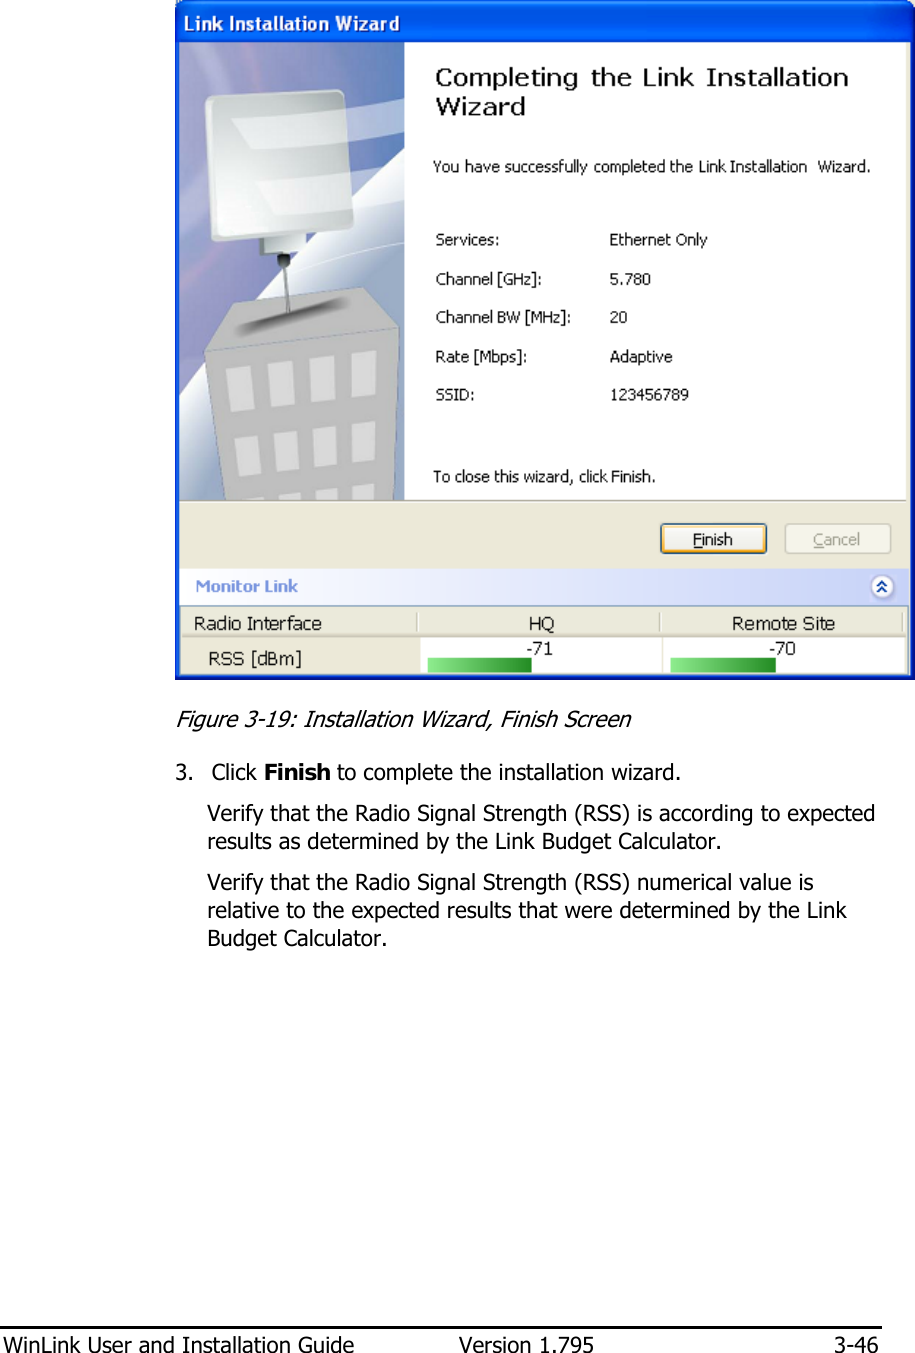  WinLink User and Installation Guide  Version 1.795  3-46   Figure  3-19: Installation Wizard, Finish Screen 3. Click Finish to complete the installation wizard. Verify that the Radio Signal Strength (RSS) is according to expected results as determined by the Link Budget Calculator. Verify that the Radio Signal Strength (RSS) numerical value is relative to the expected results that were determined by the Link Budget Calculator. 